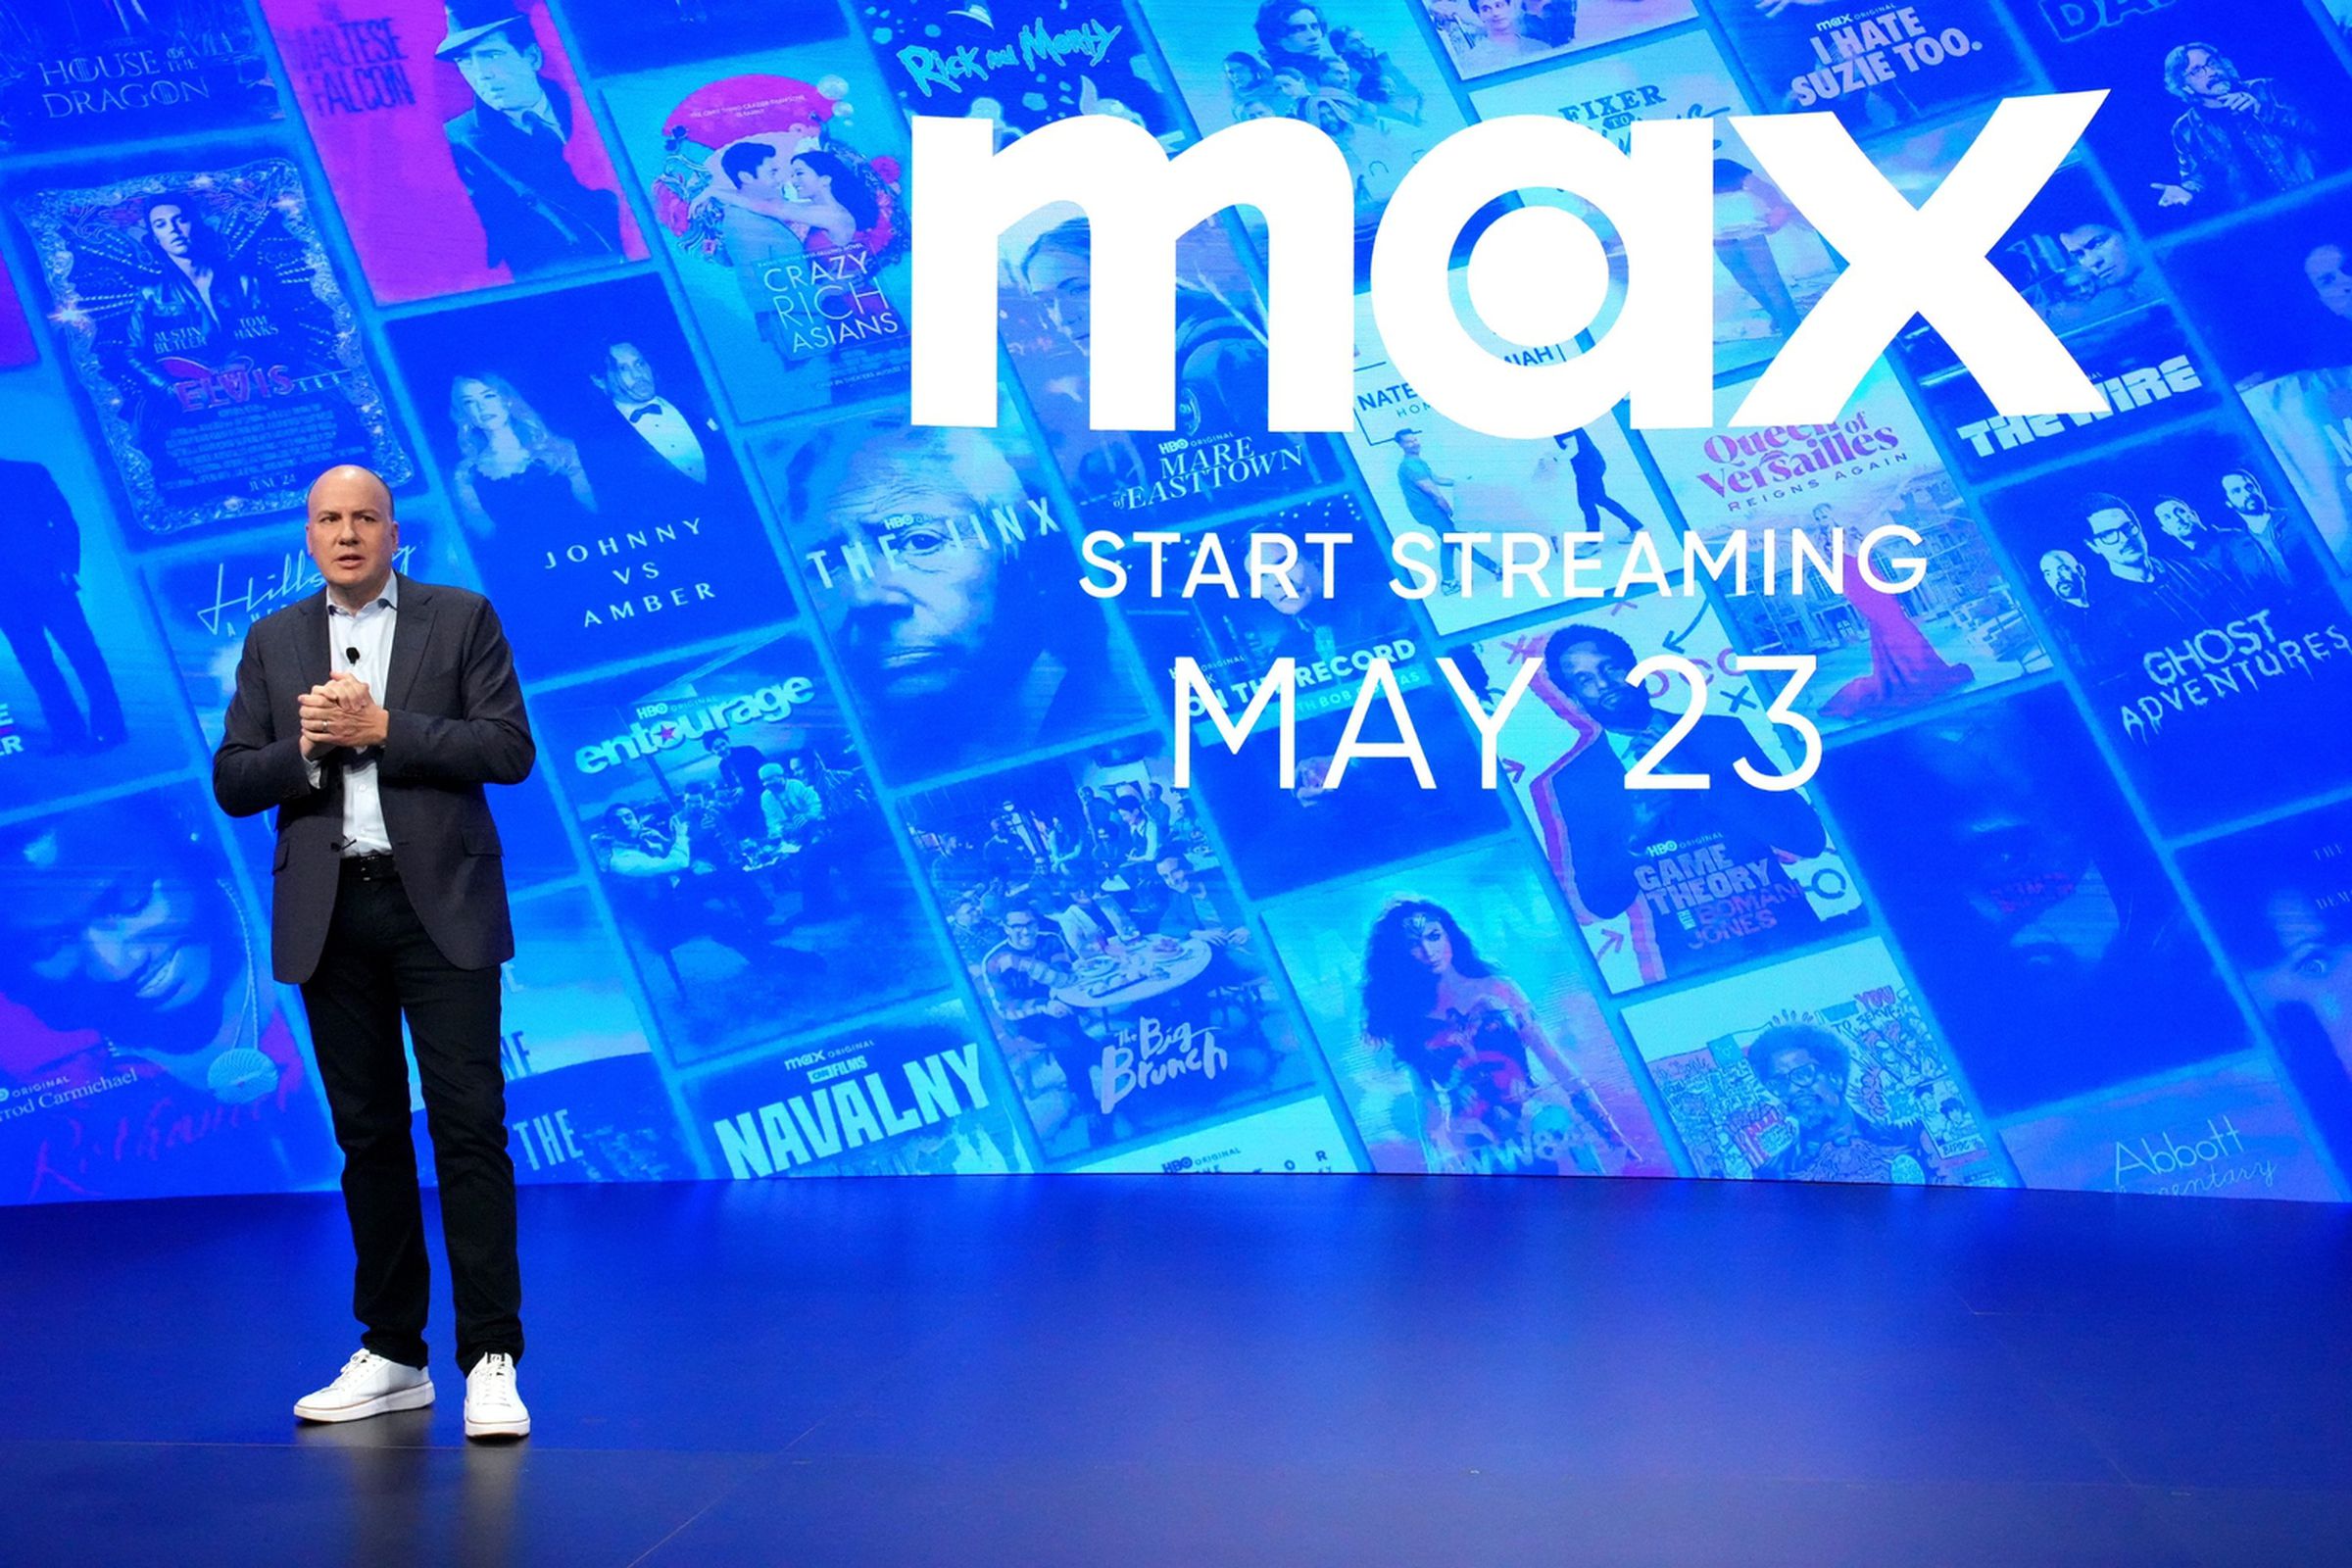 A picture of chair and CEO of HBO and Max content, Casey Bloys, standing in front of the Max logo.